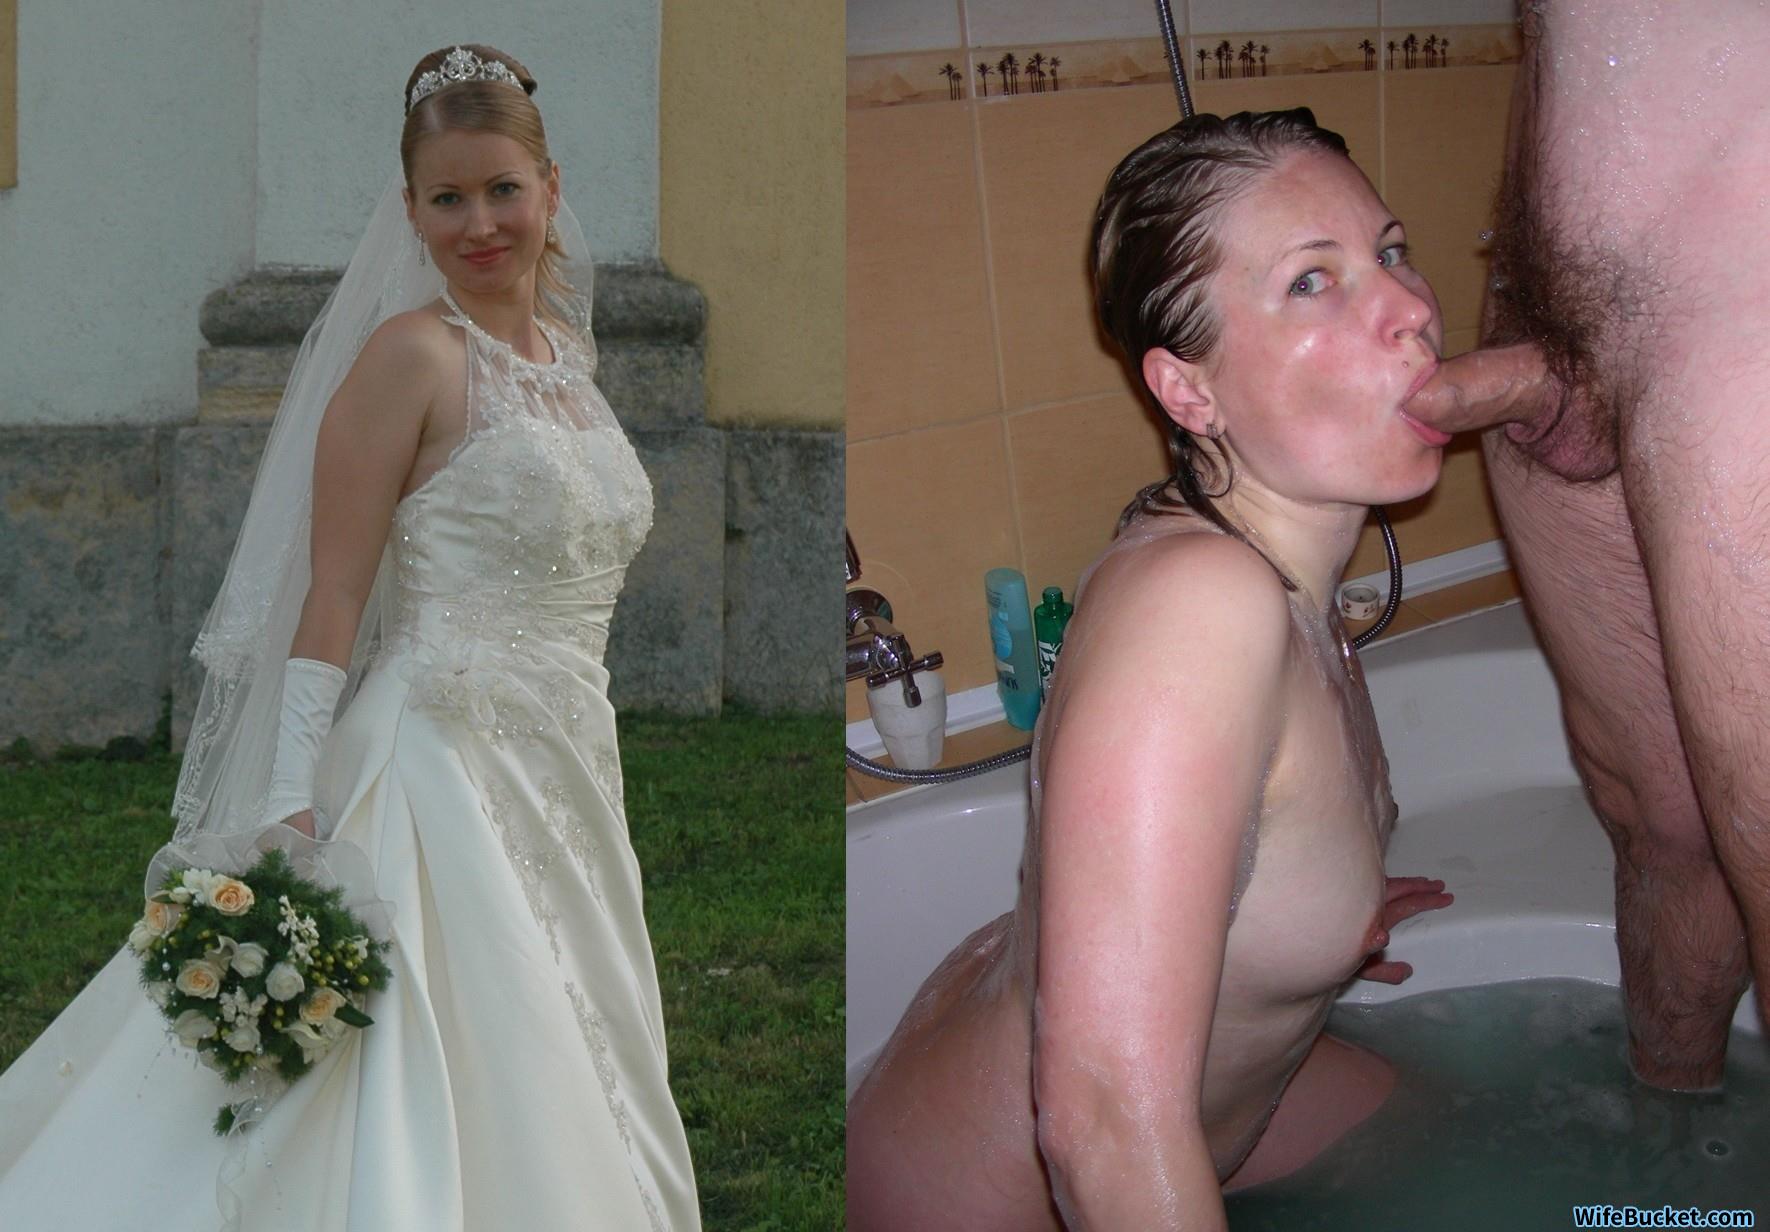 1770px x 1232px - Before-after nudes of sexy amateur brides! Some home porn, too :-) â€“  WifeBucket | Offical MILF Blog